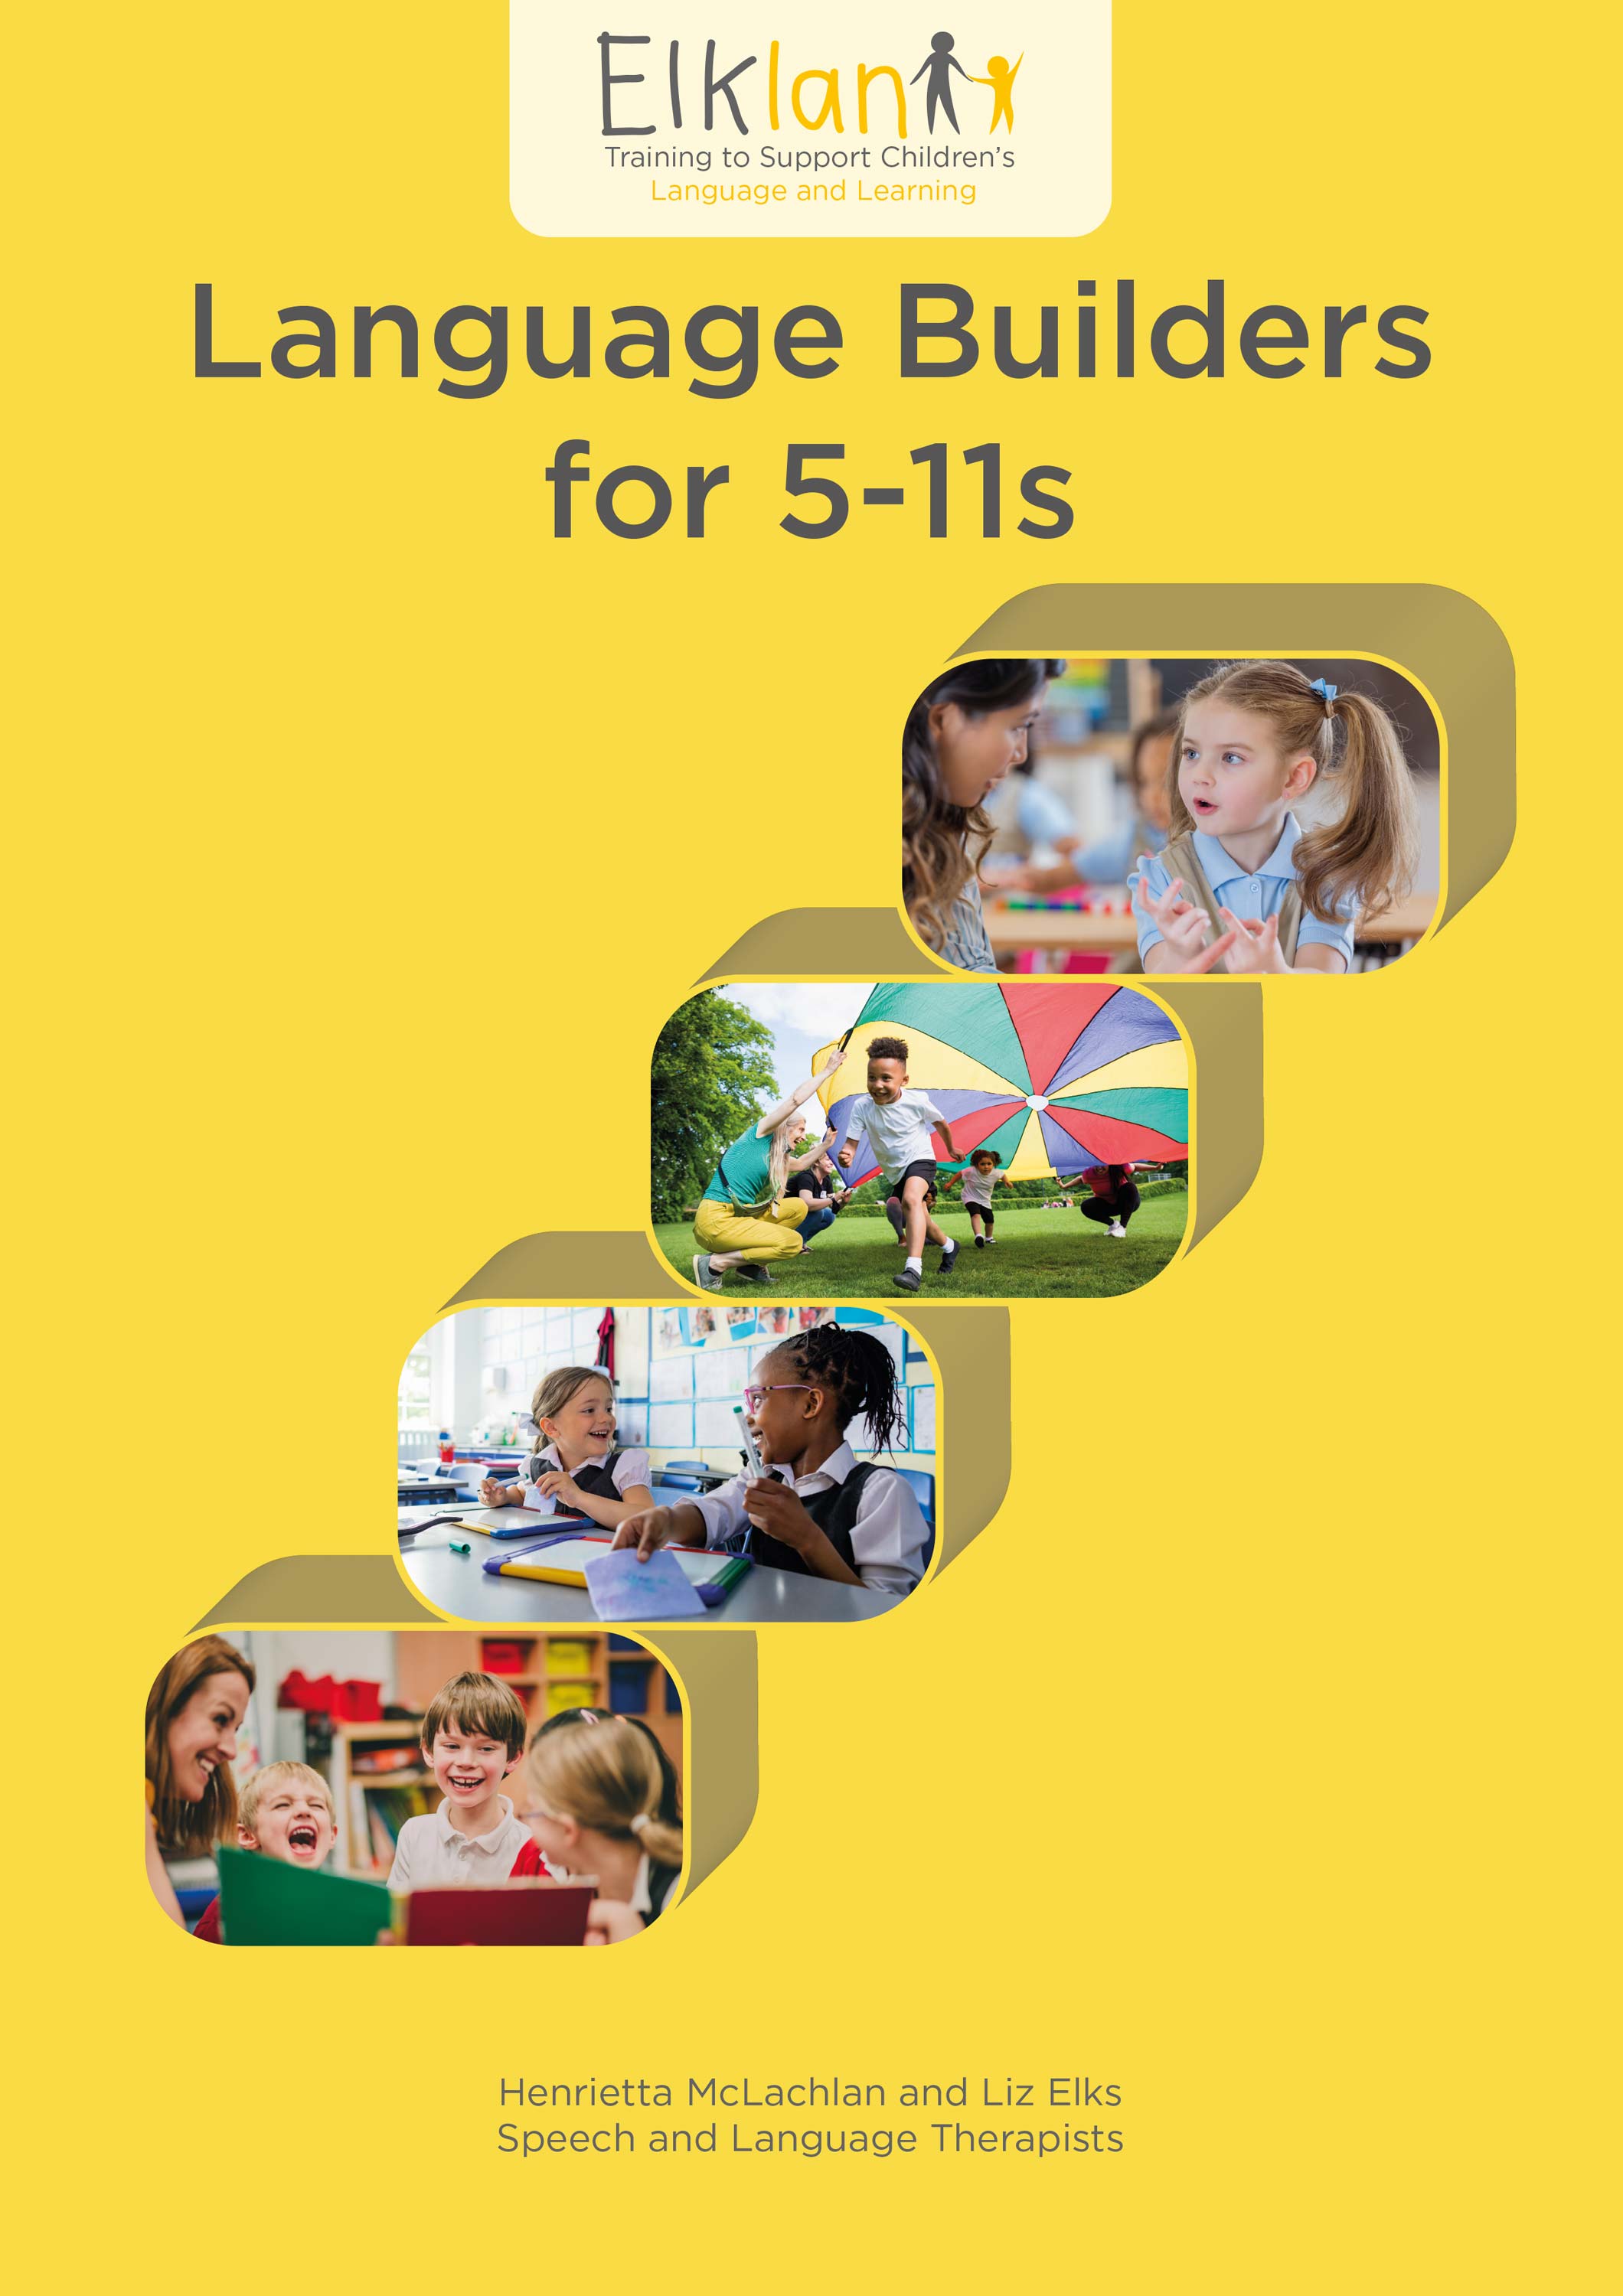 Language Builders for 5-11s